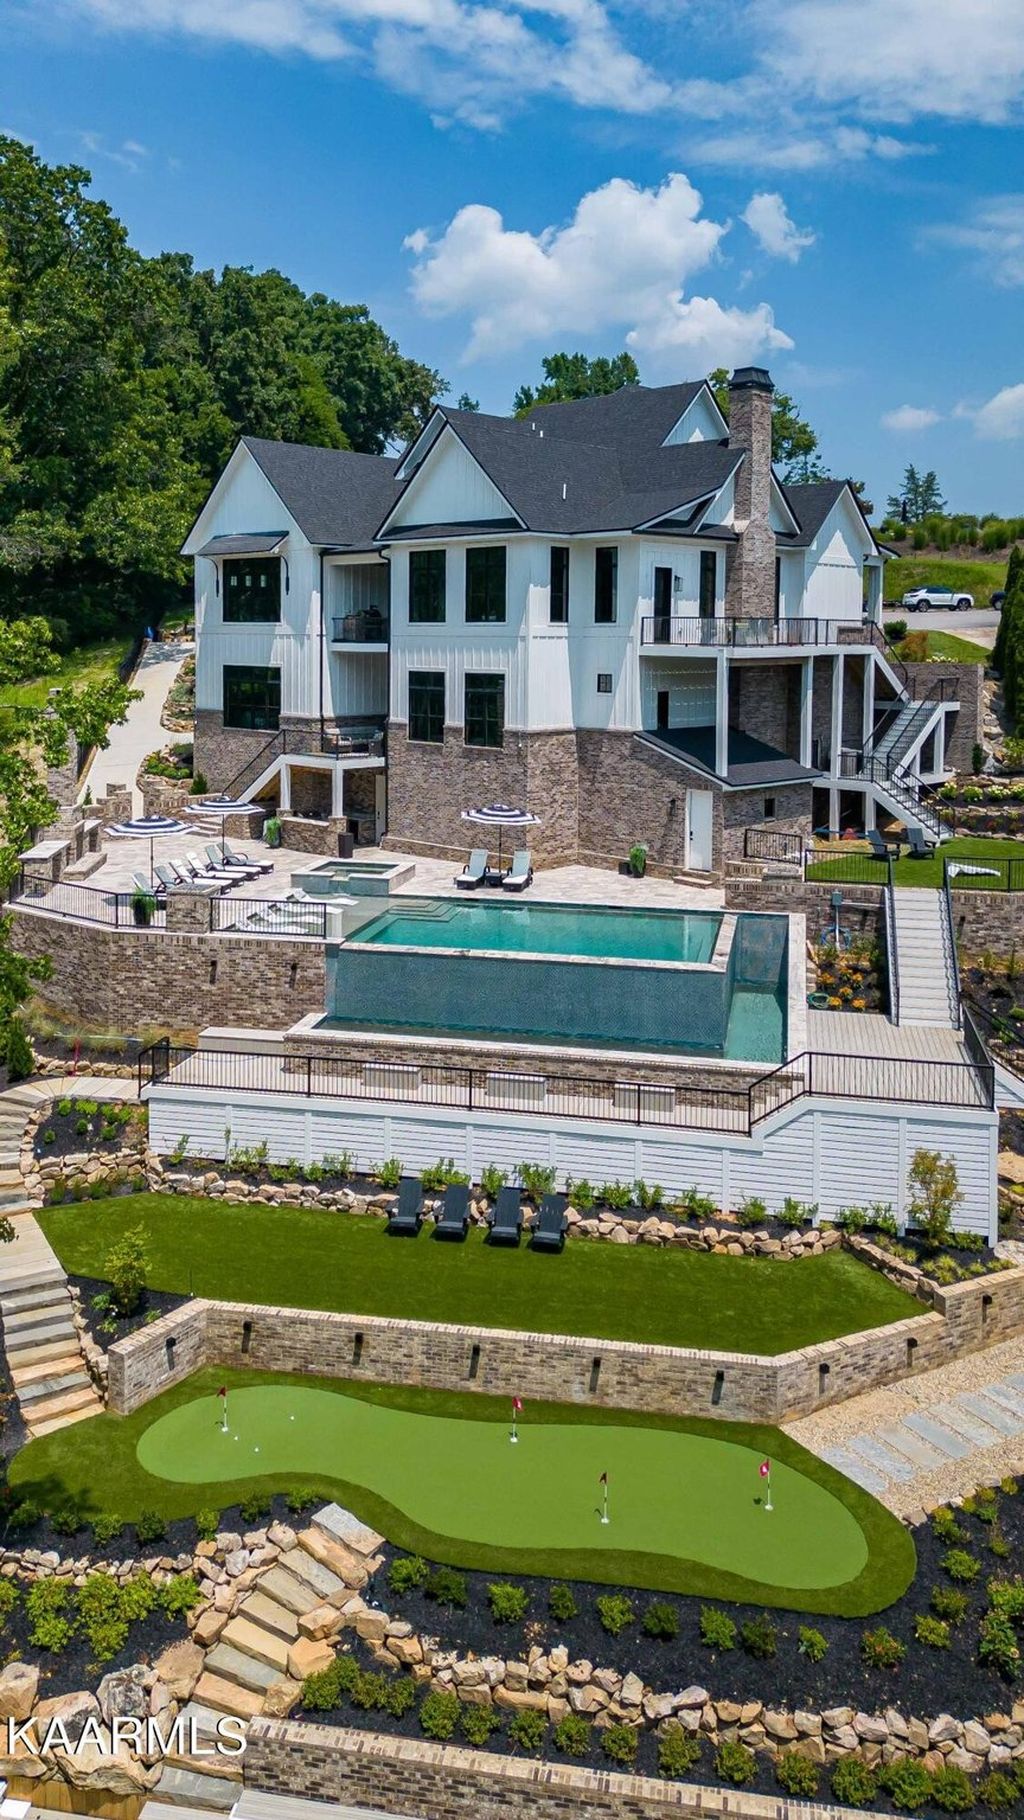 Awe inspiring residence with water views and privacy in knoxville tennessee listed at 5. 495 million 5